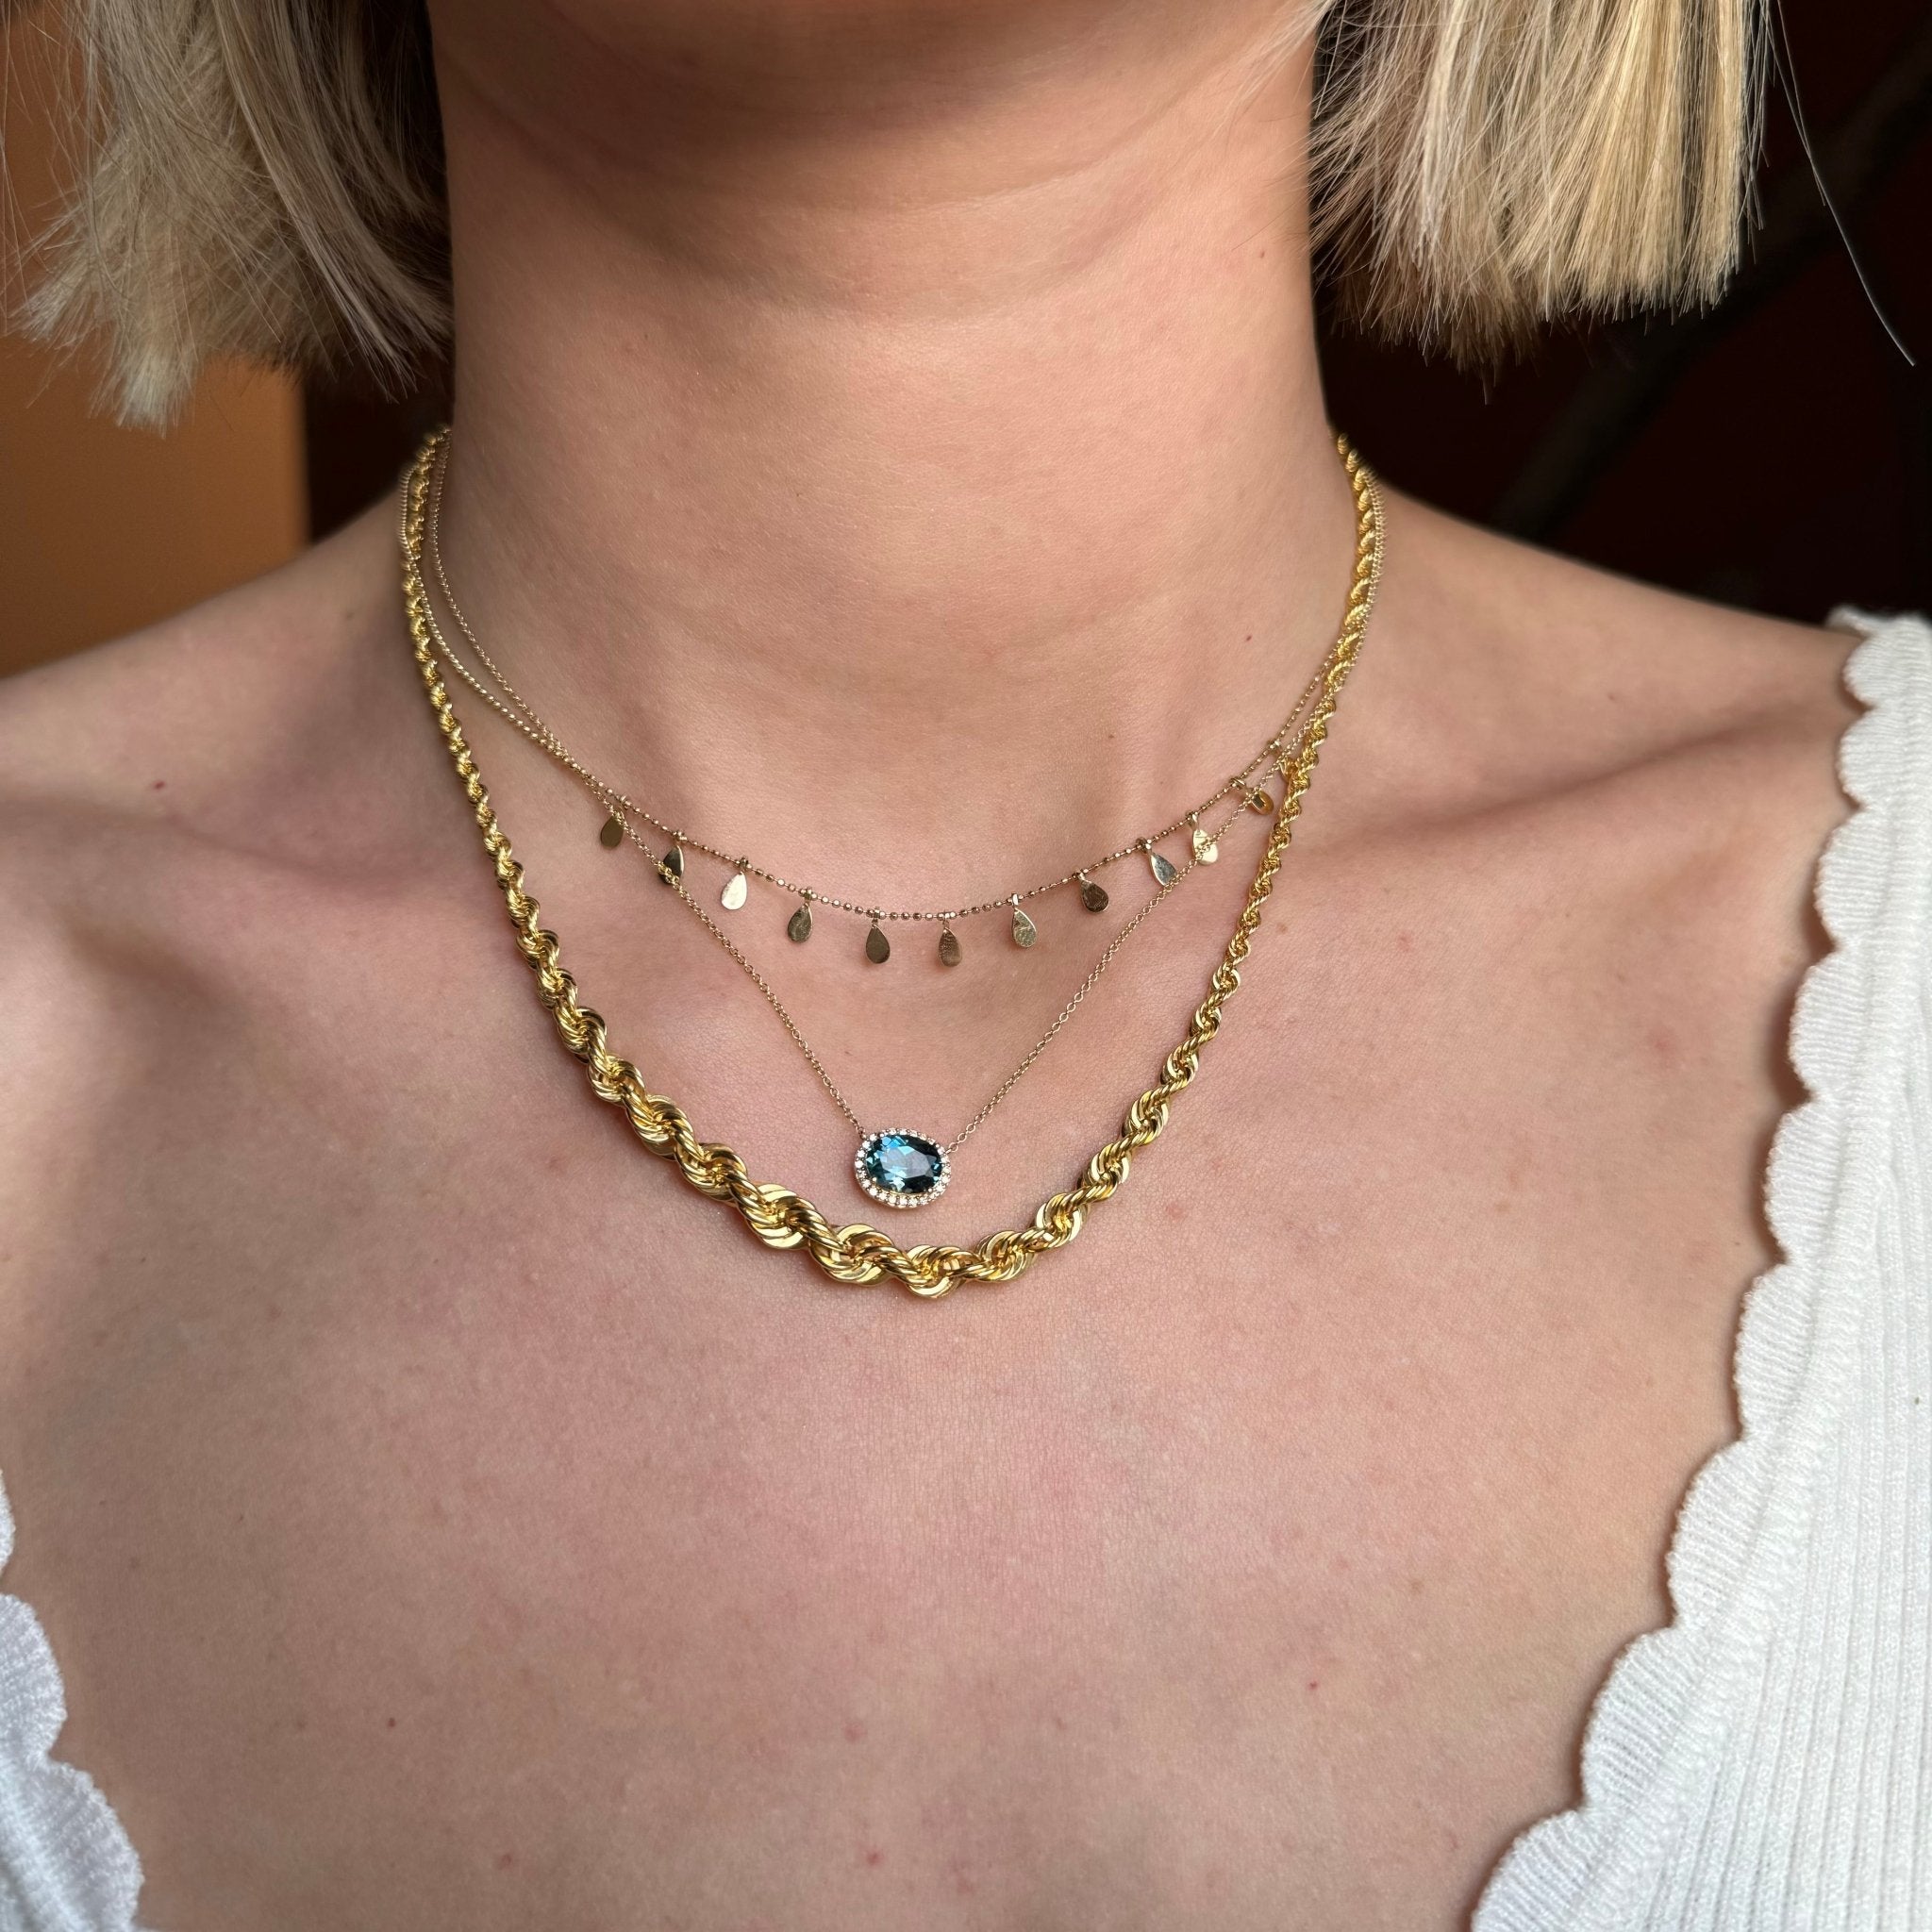 Buy Gold Rope Choker Necklace, Gold Women's Rope Chain, Gold Women's  Necklace, Gold Women's Chain, Gold Woven Necklace, Women's Gold Necklace  Online in India - Etsy